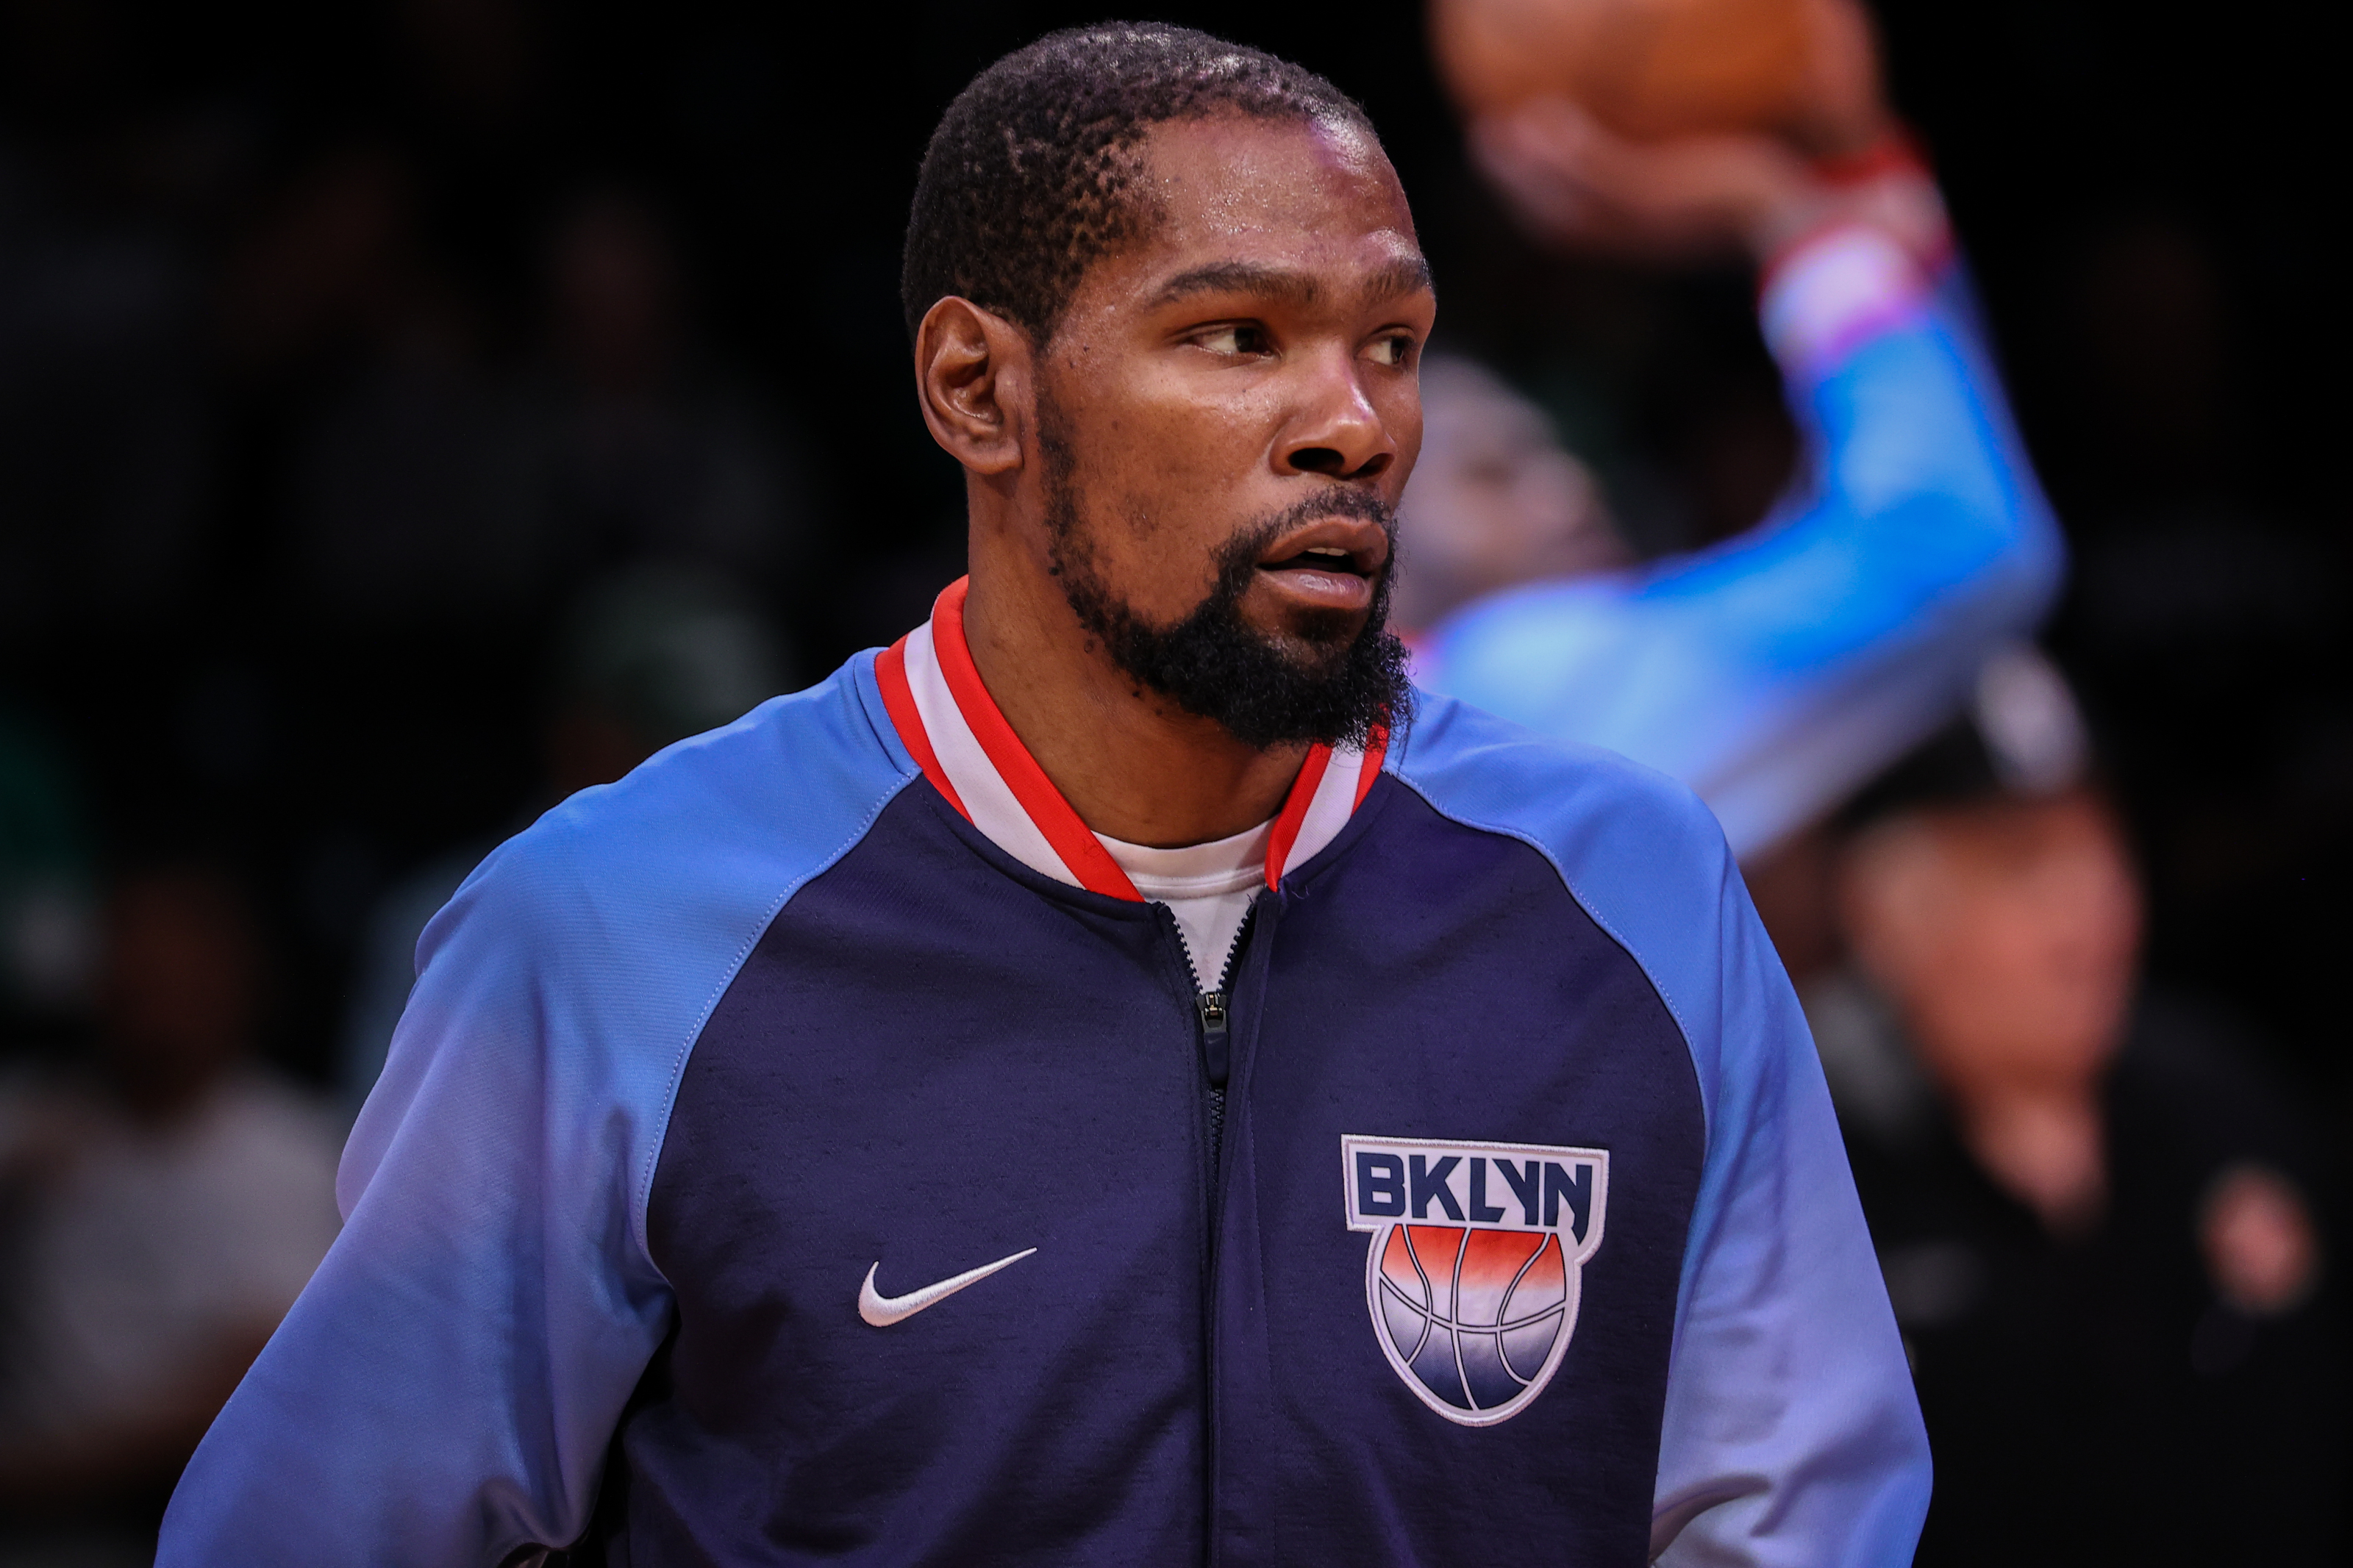 As Brooklyn's best all-around player, it's time for Kevin Durant to show  it. - NetsDaily